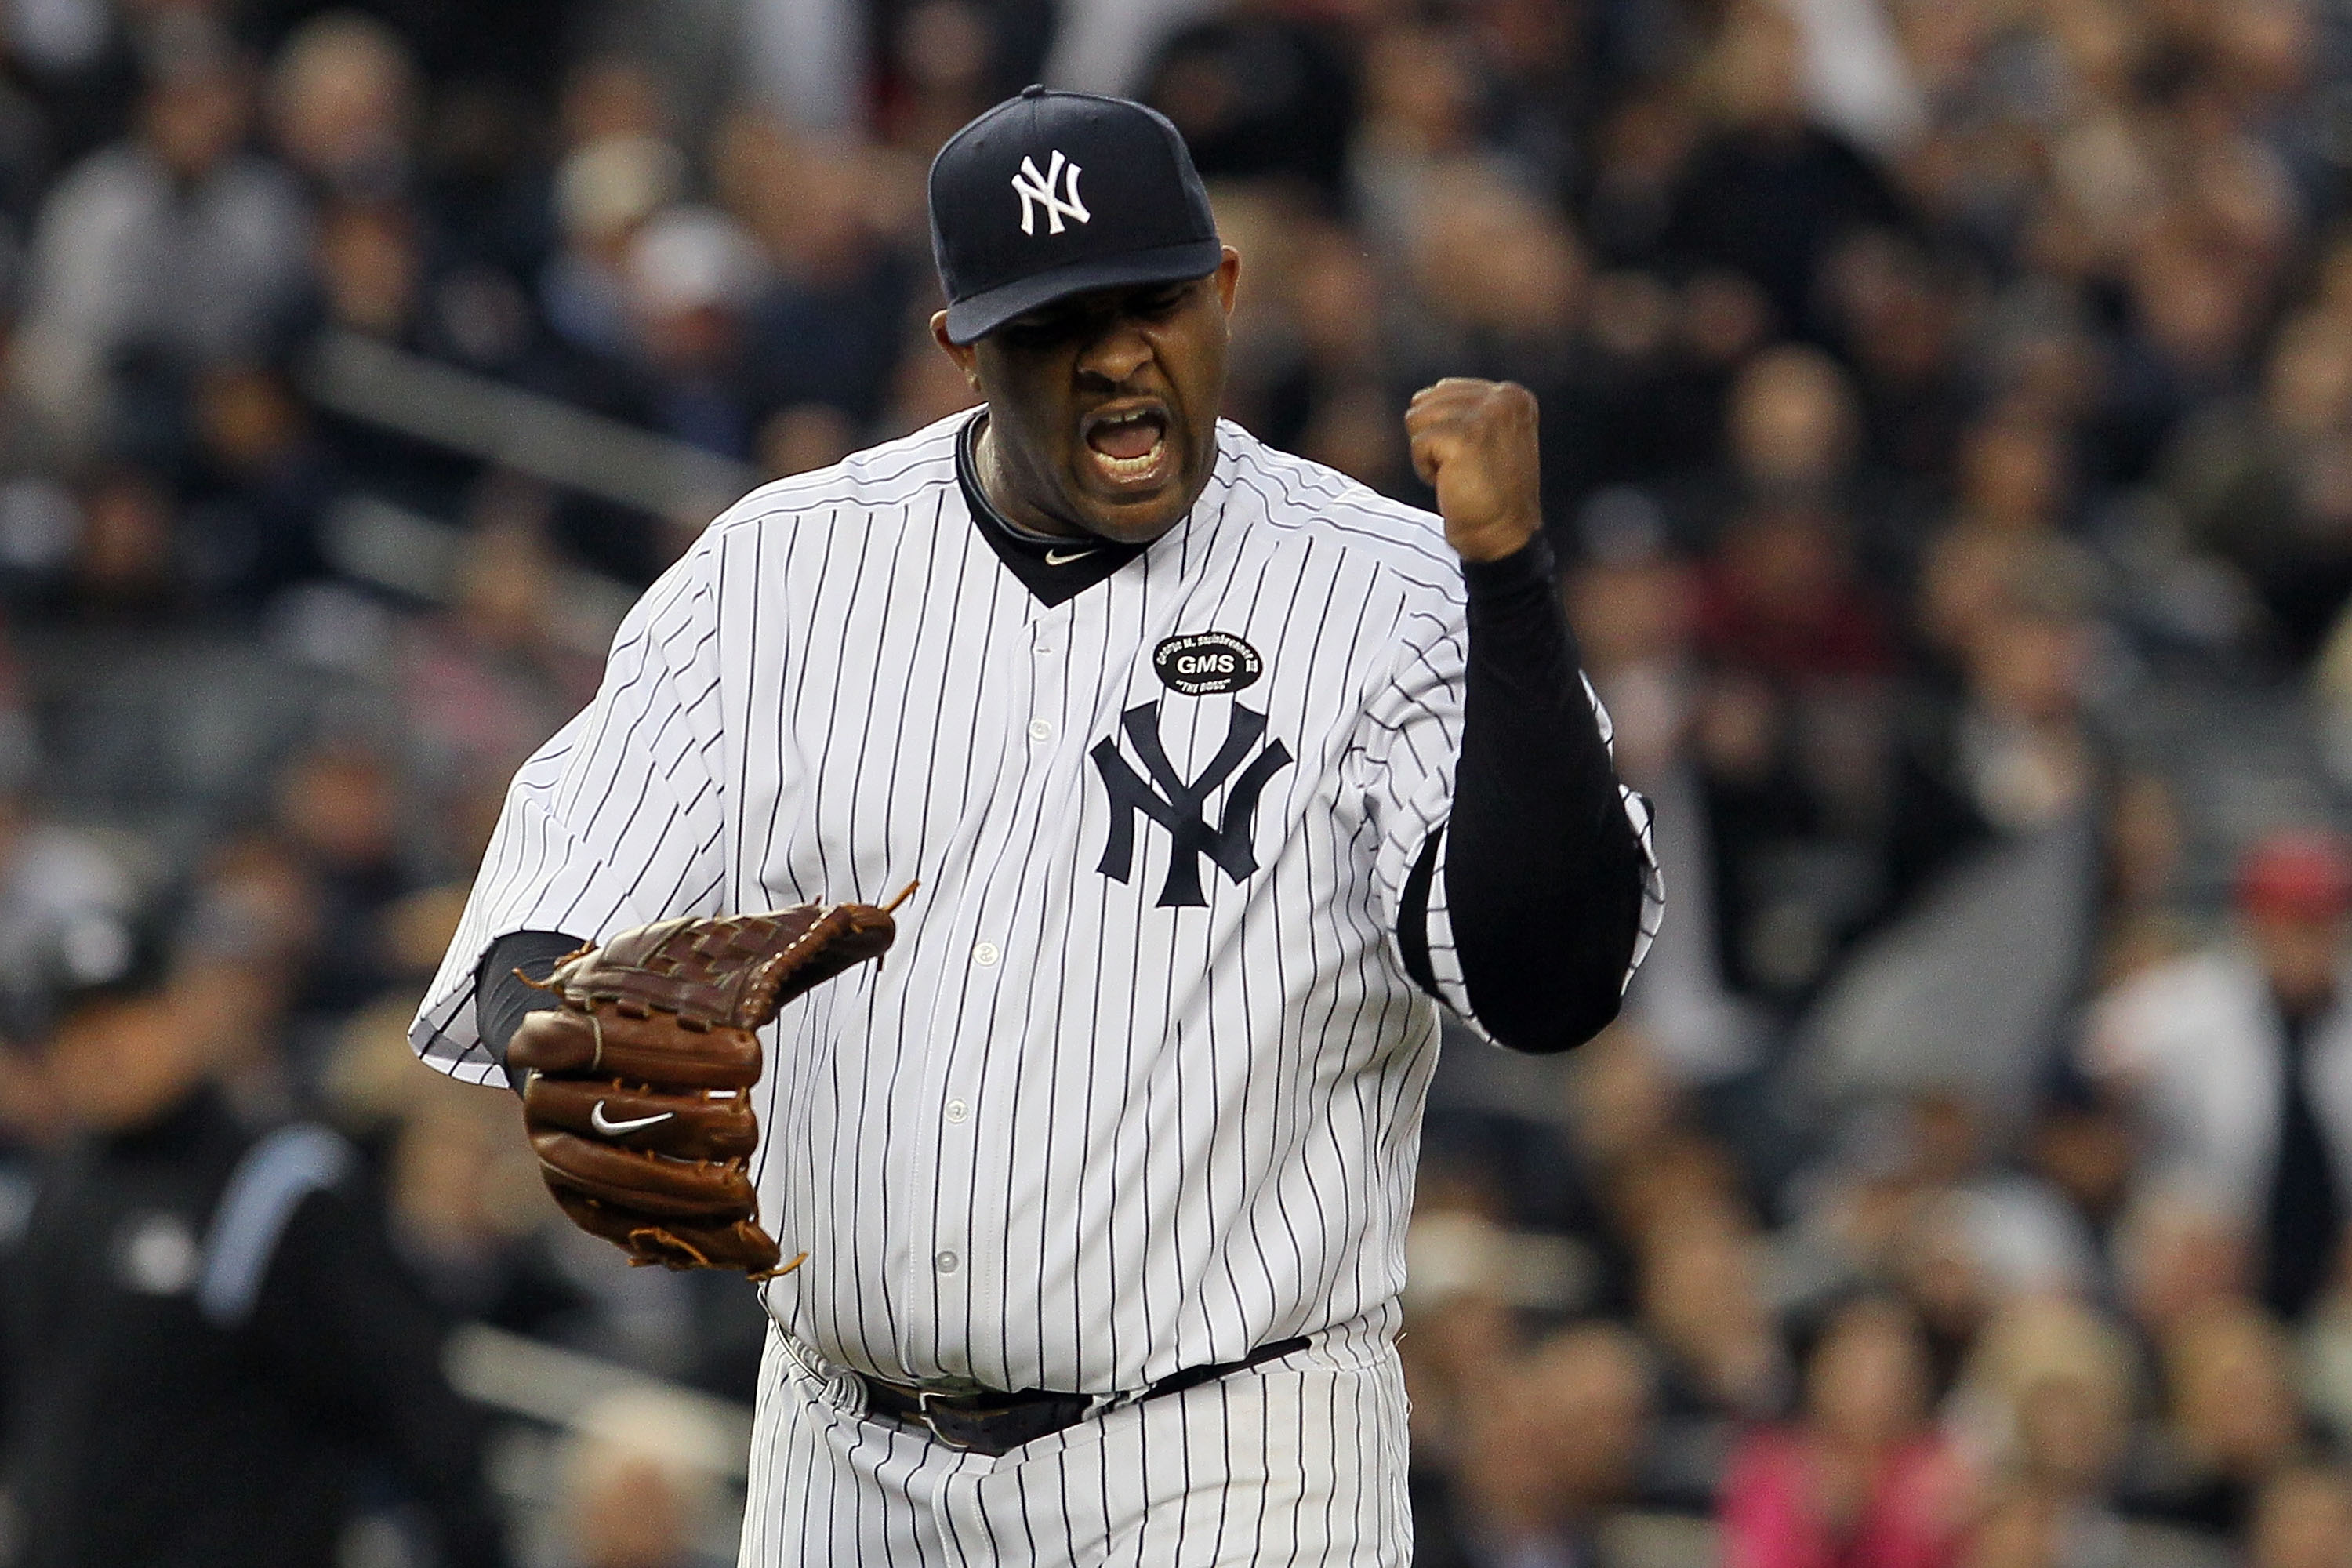 Yankees' CC Sabathia Played Better When Overweight, He Says